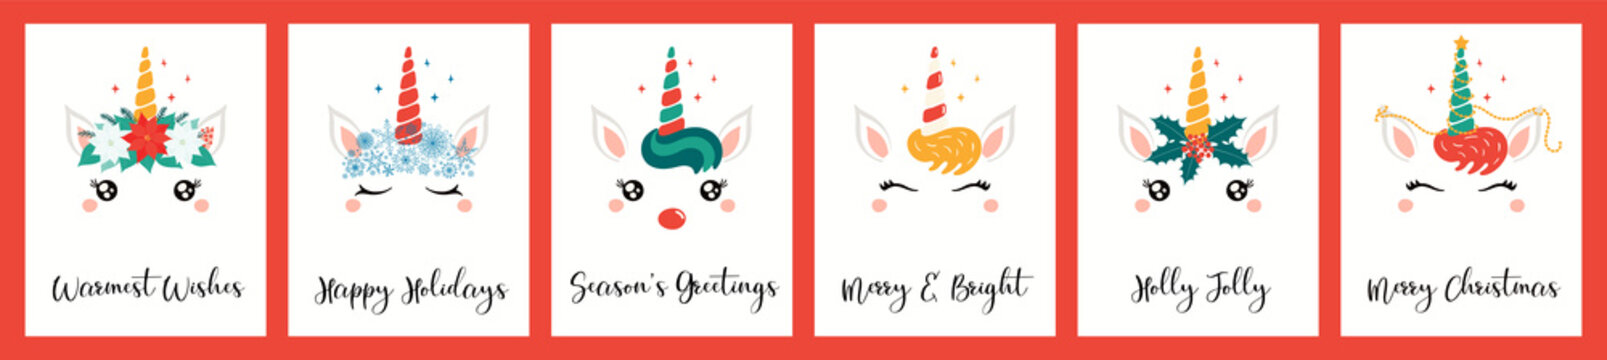 Collection of Christmas cards with different cute unicorn faces, in flower wreaths, with garlands, text. Hand drawn vector illustration. Flat style design. Concept for holiday print, invite, gift tag.